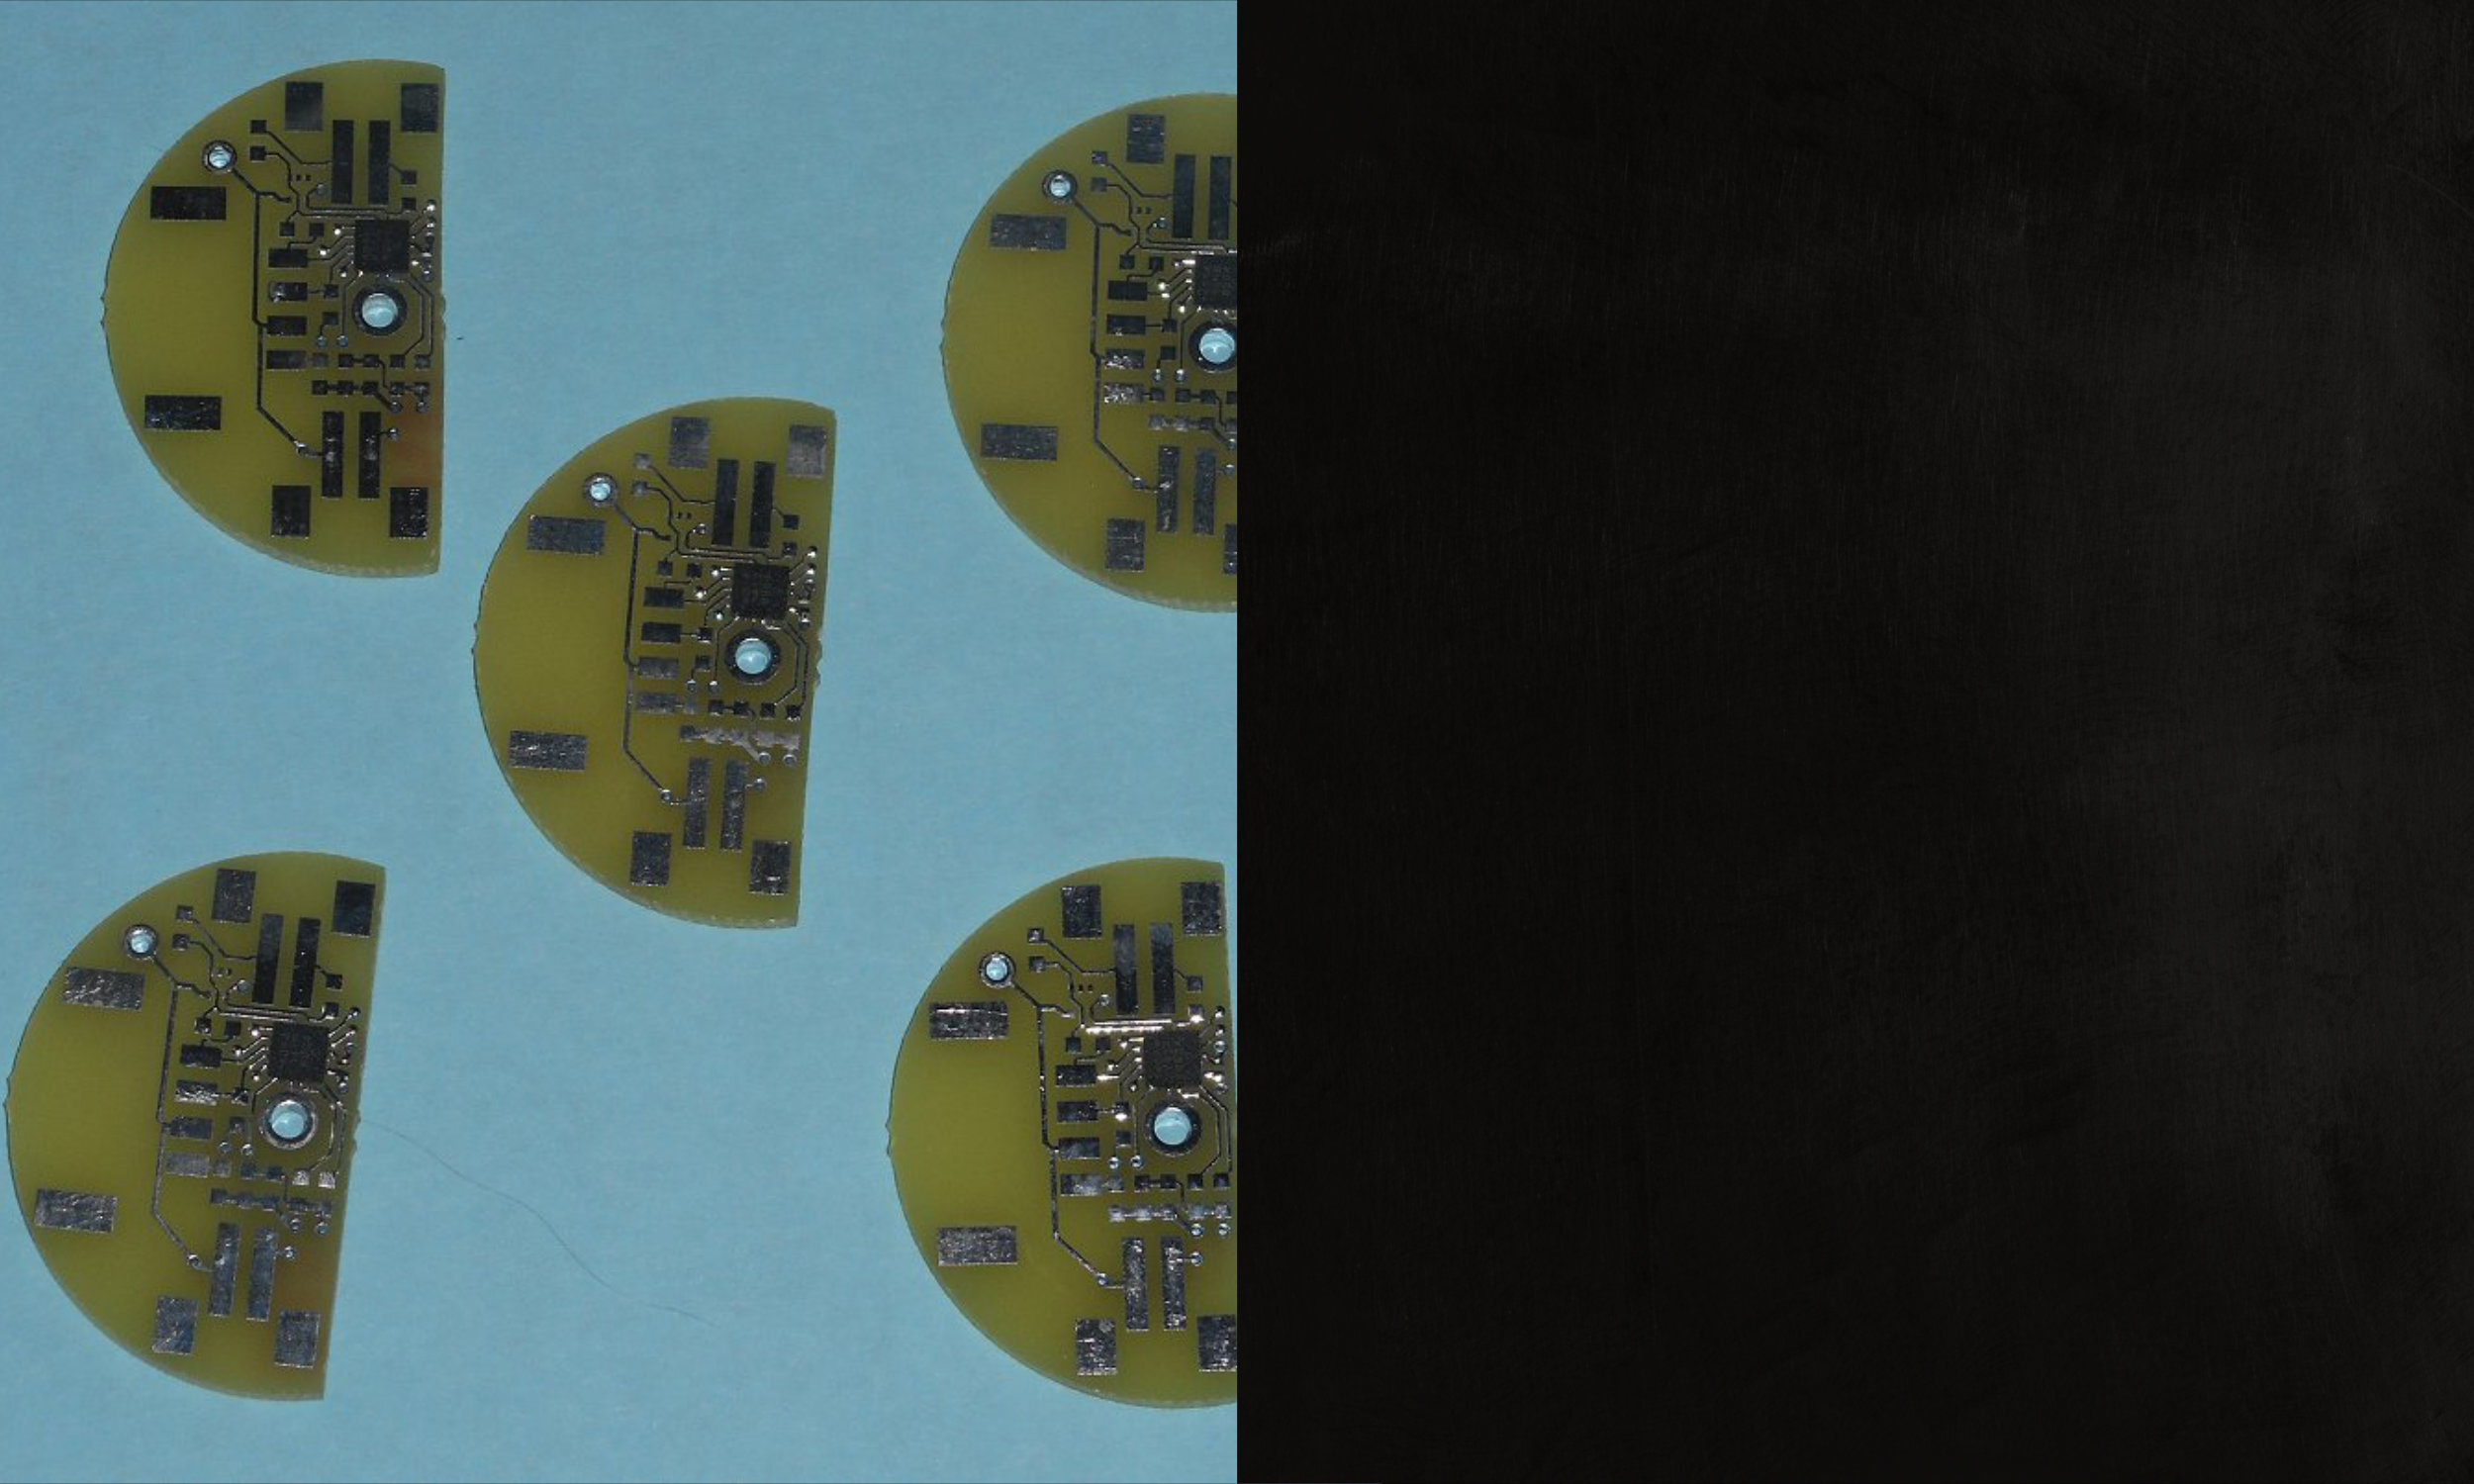  The last step was to fabricate a PCB in the half-moon shape that would fit inside the valve body. 